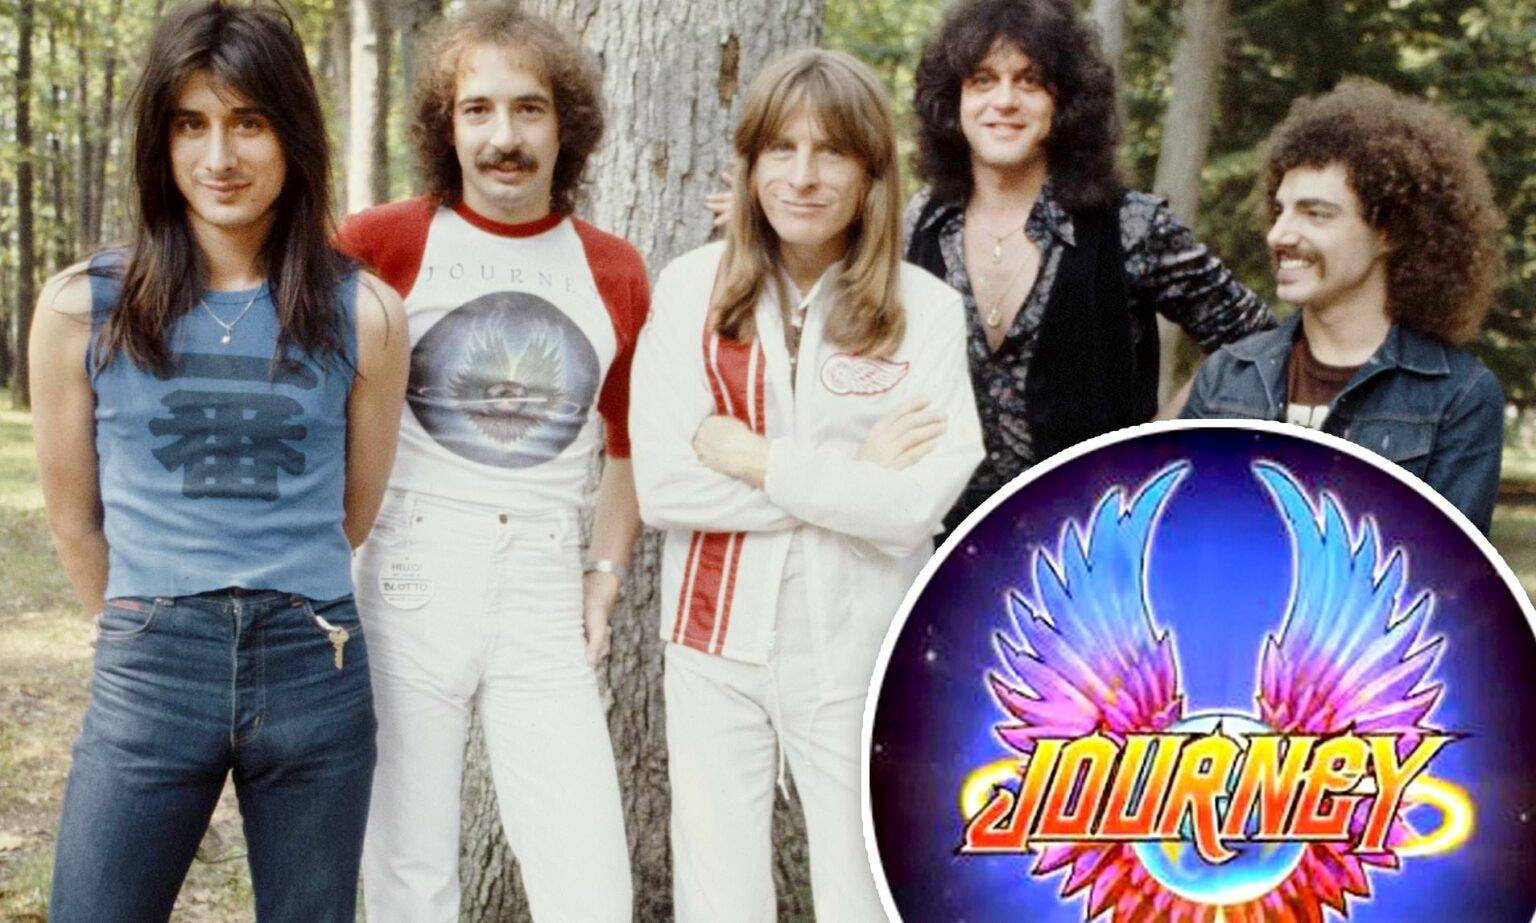 journey band outfits